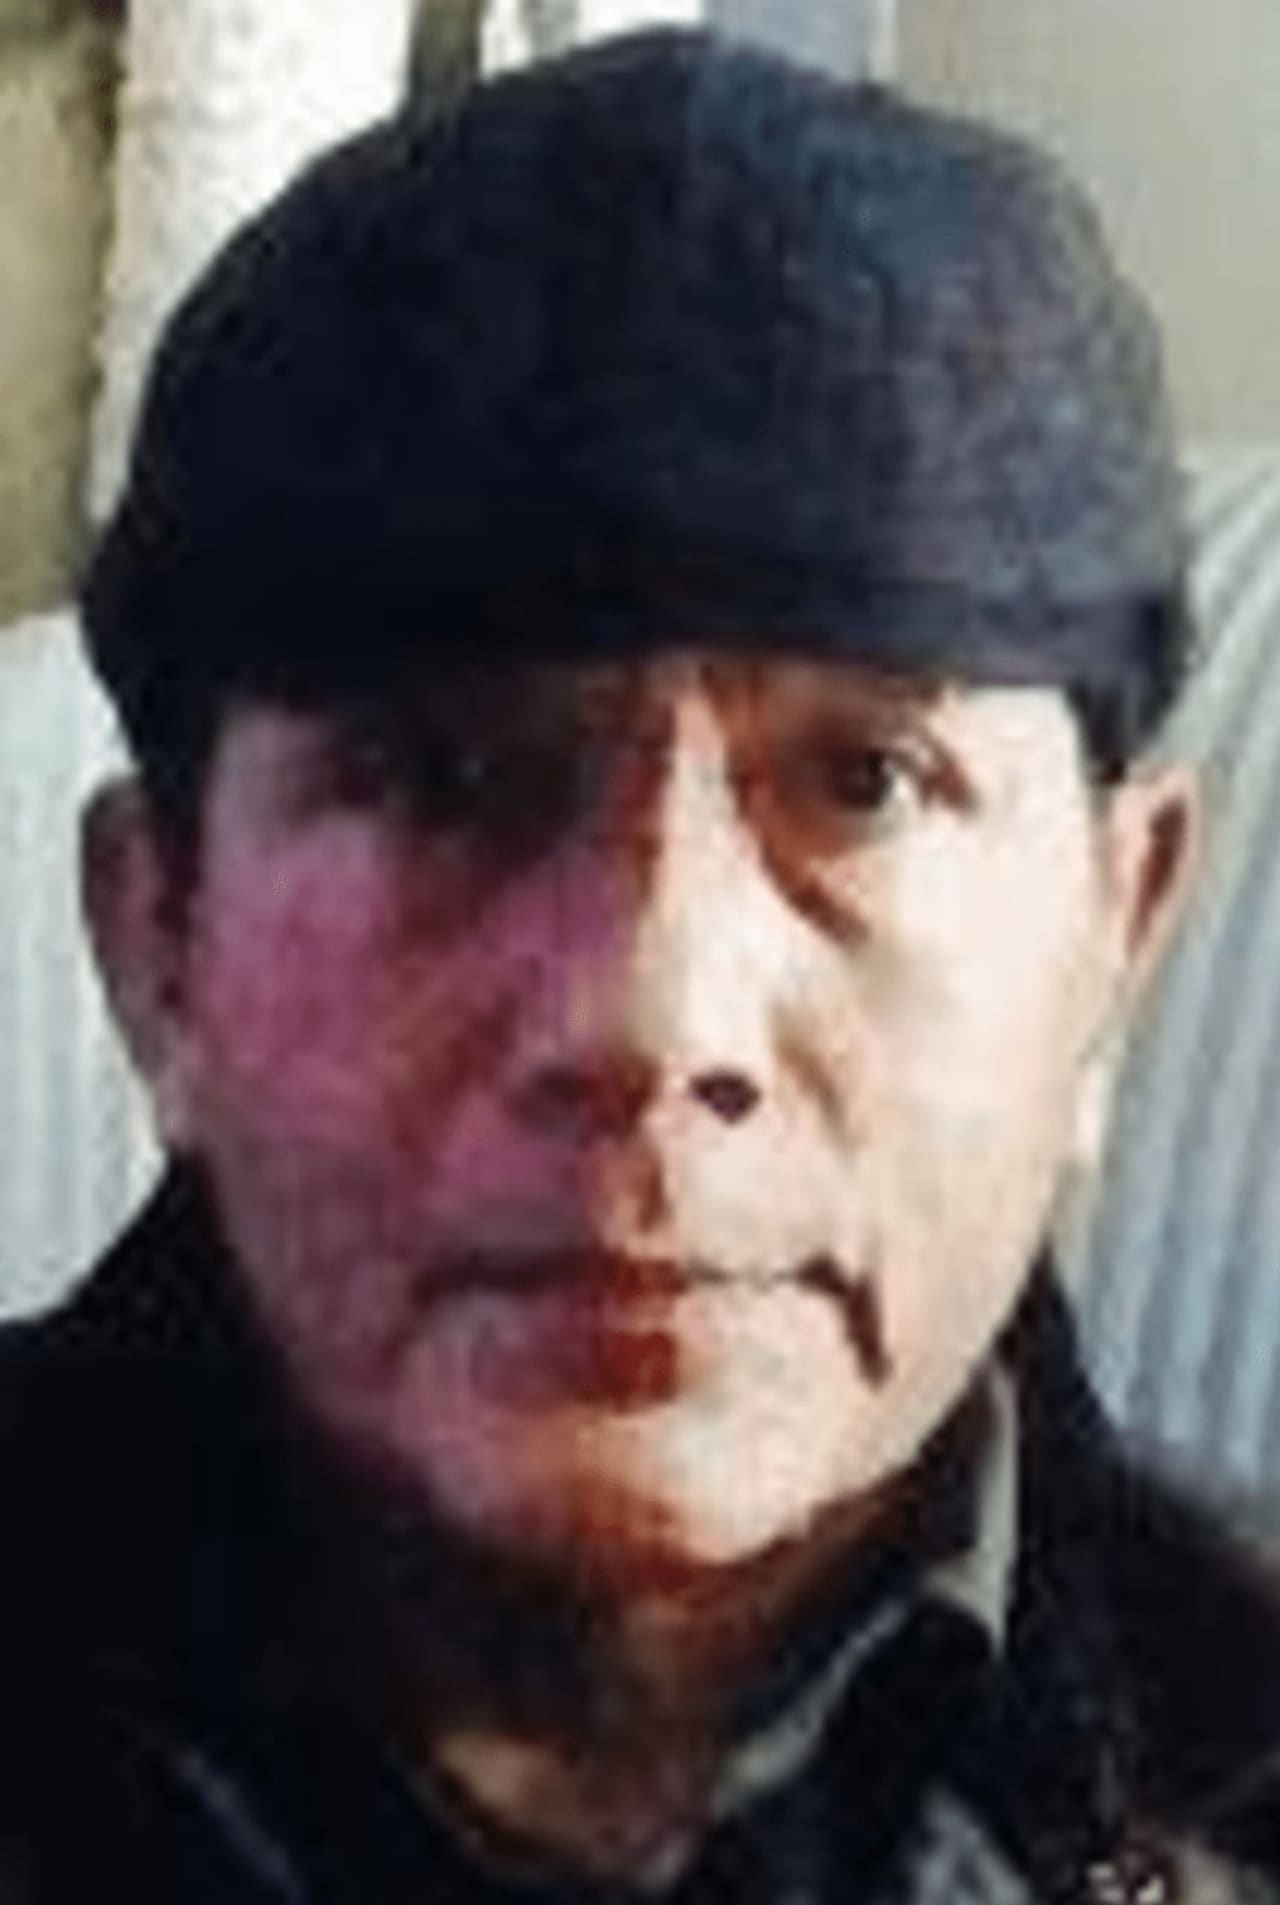 An alert has been issued for 60-year-old Cesar Manrique, who was reported missing in White Plains.